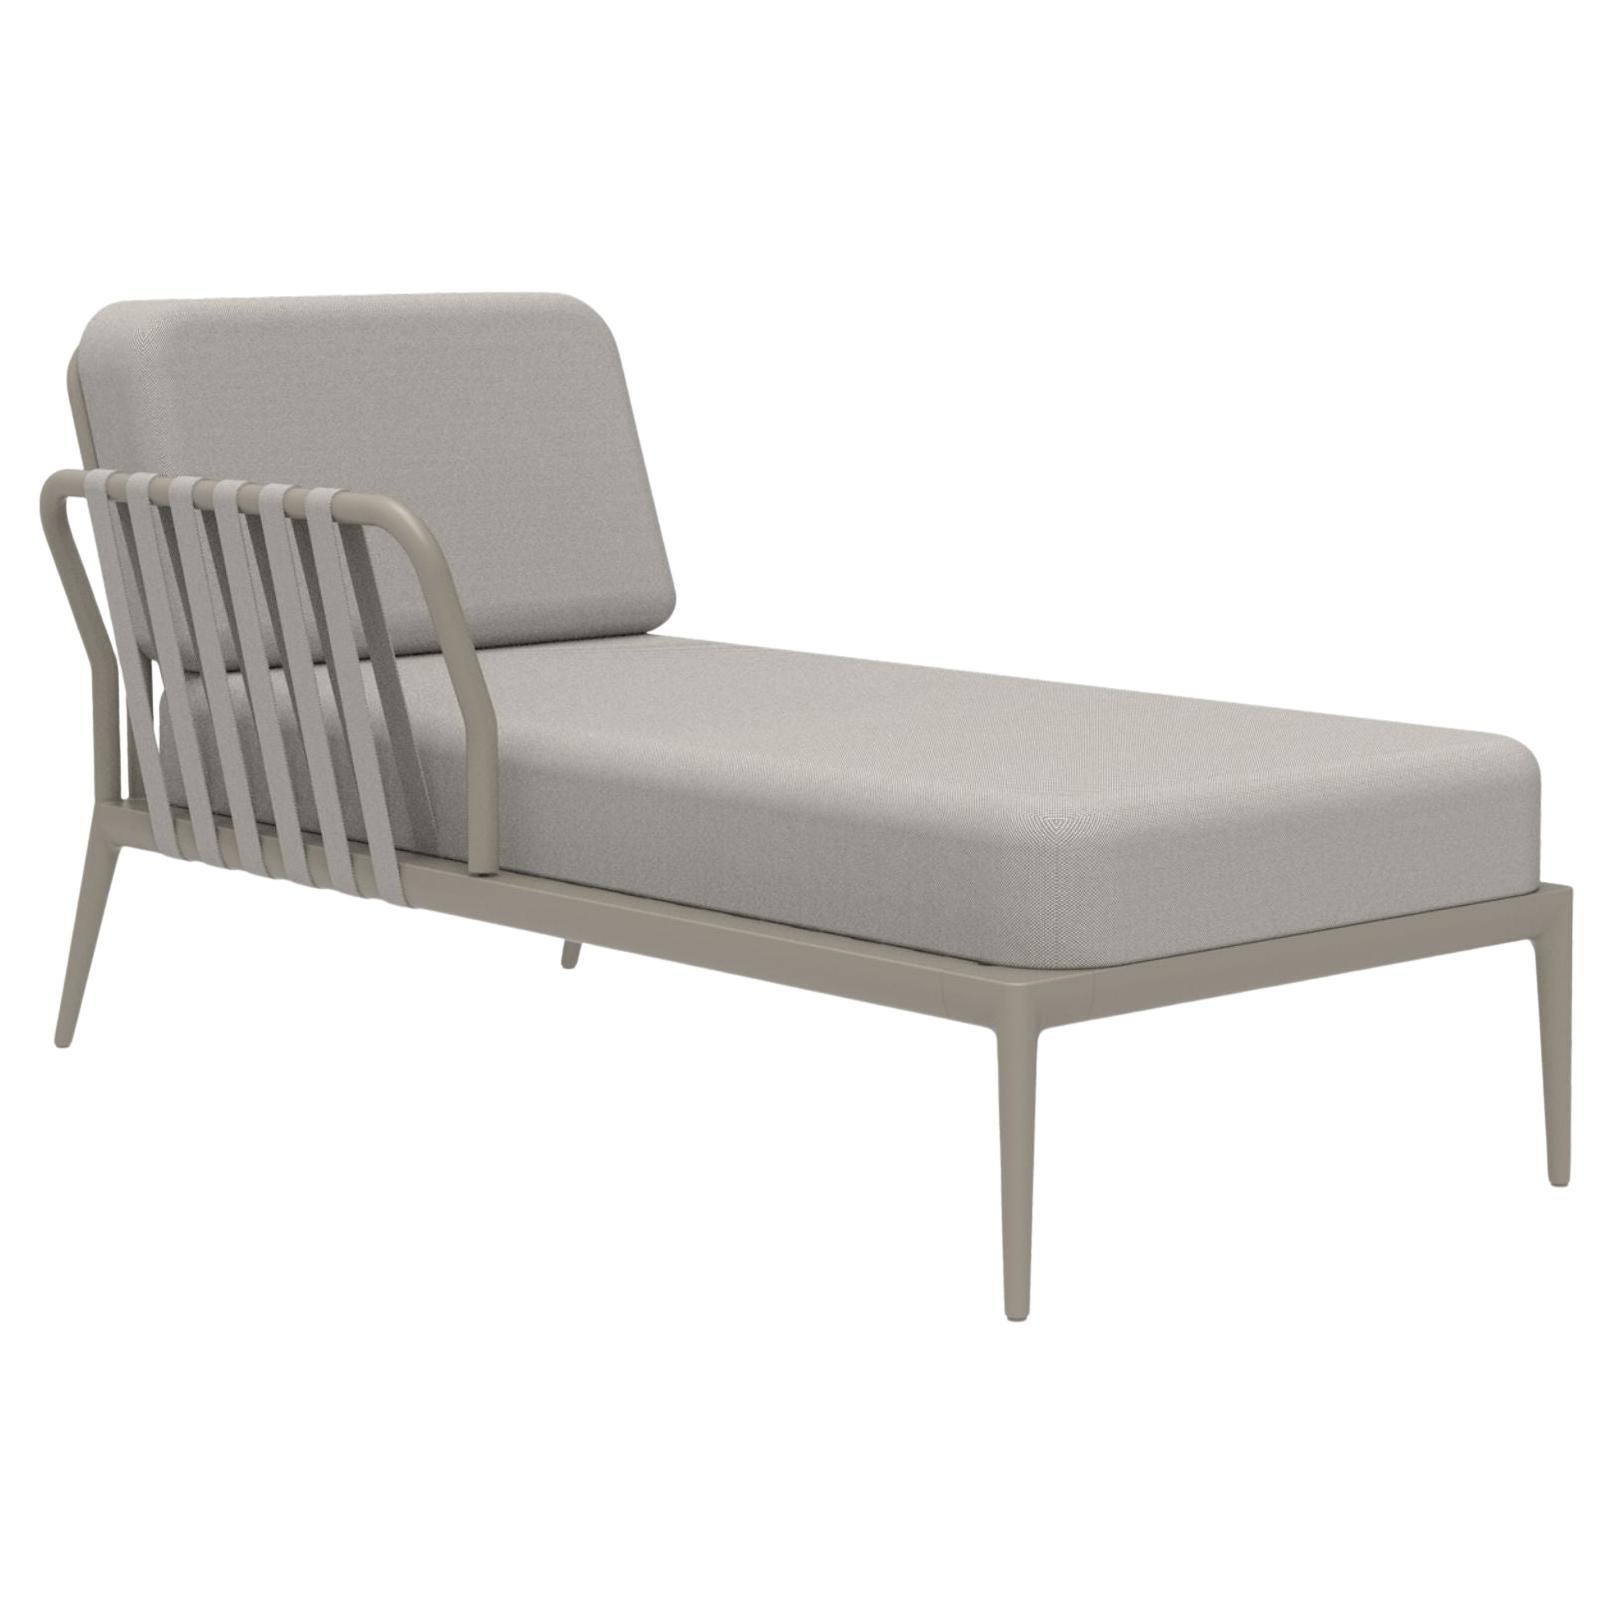 Ribbons Cream Right Chaise Lounge by Mowee For Sale